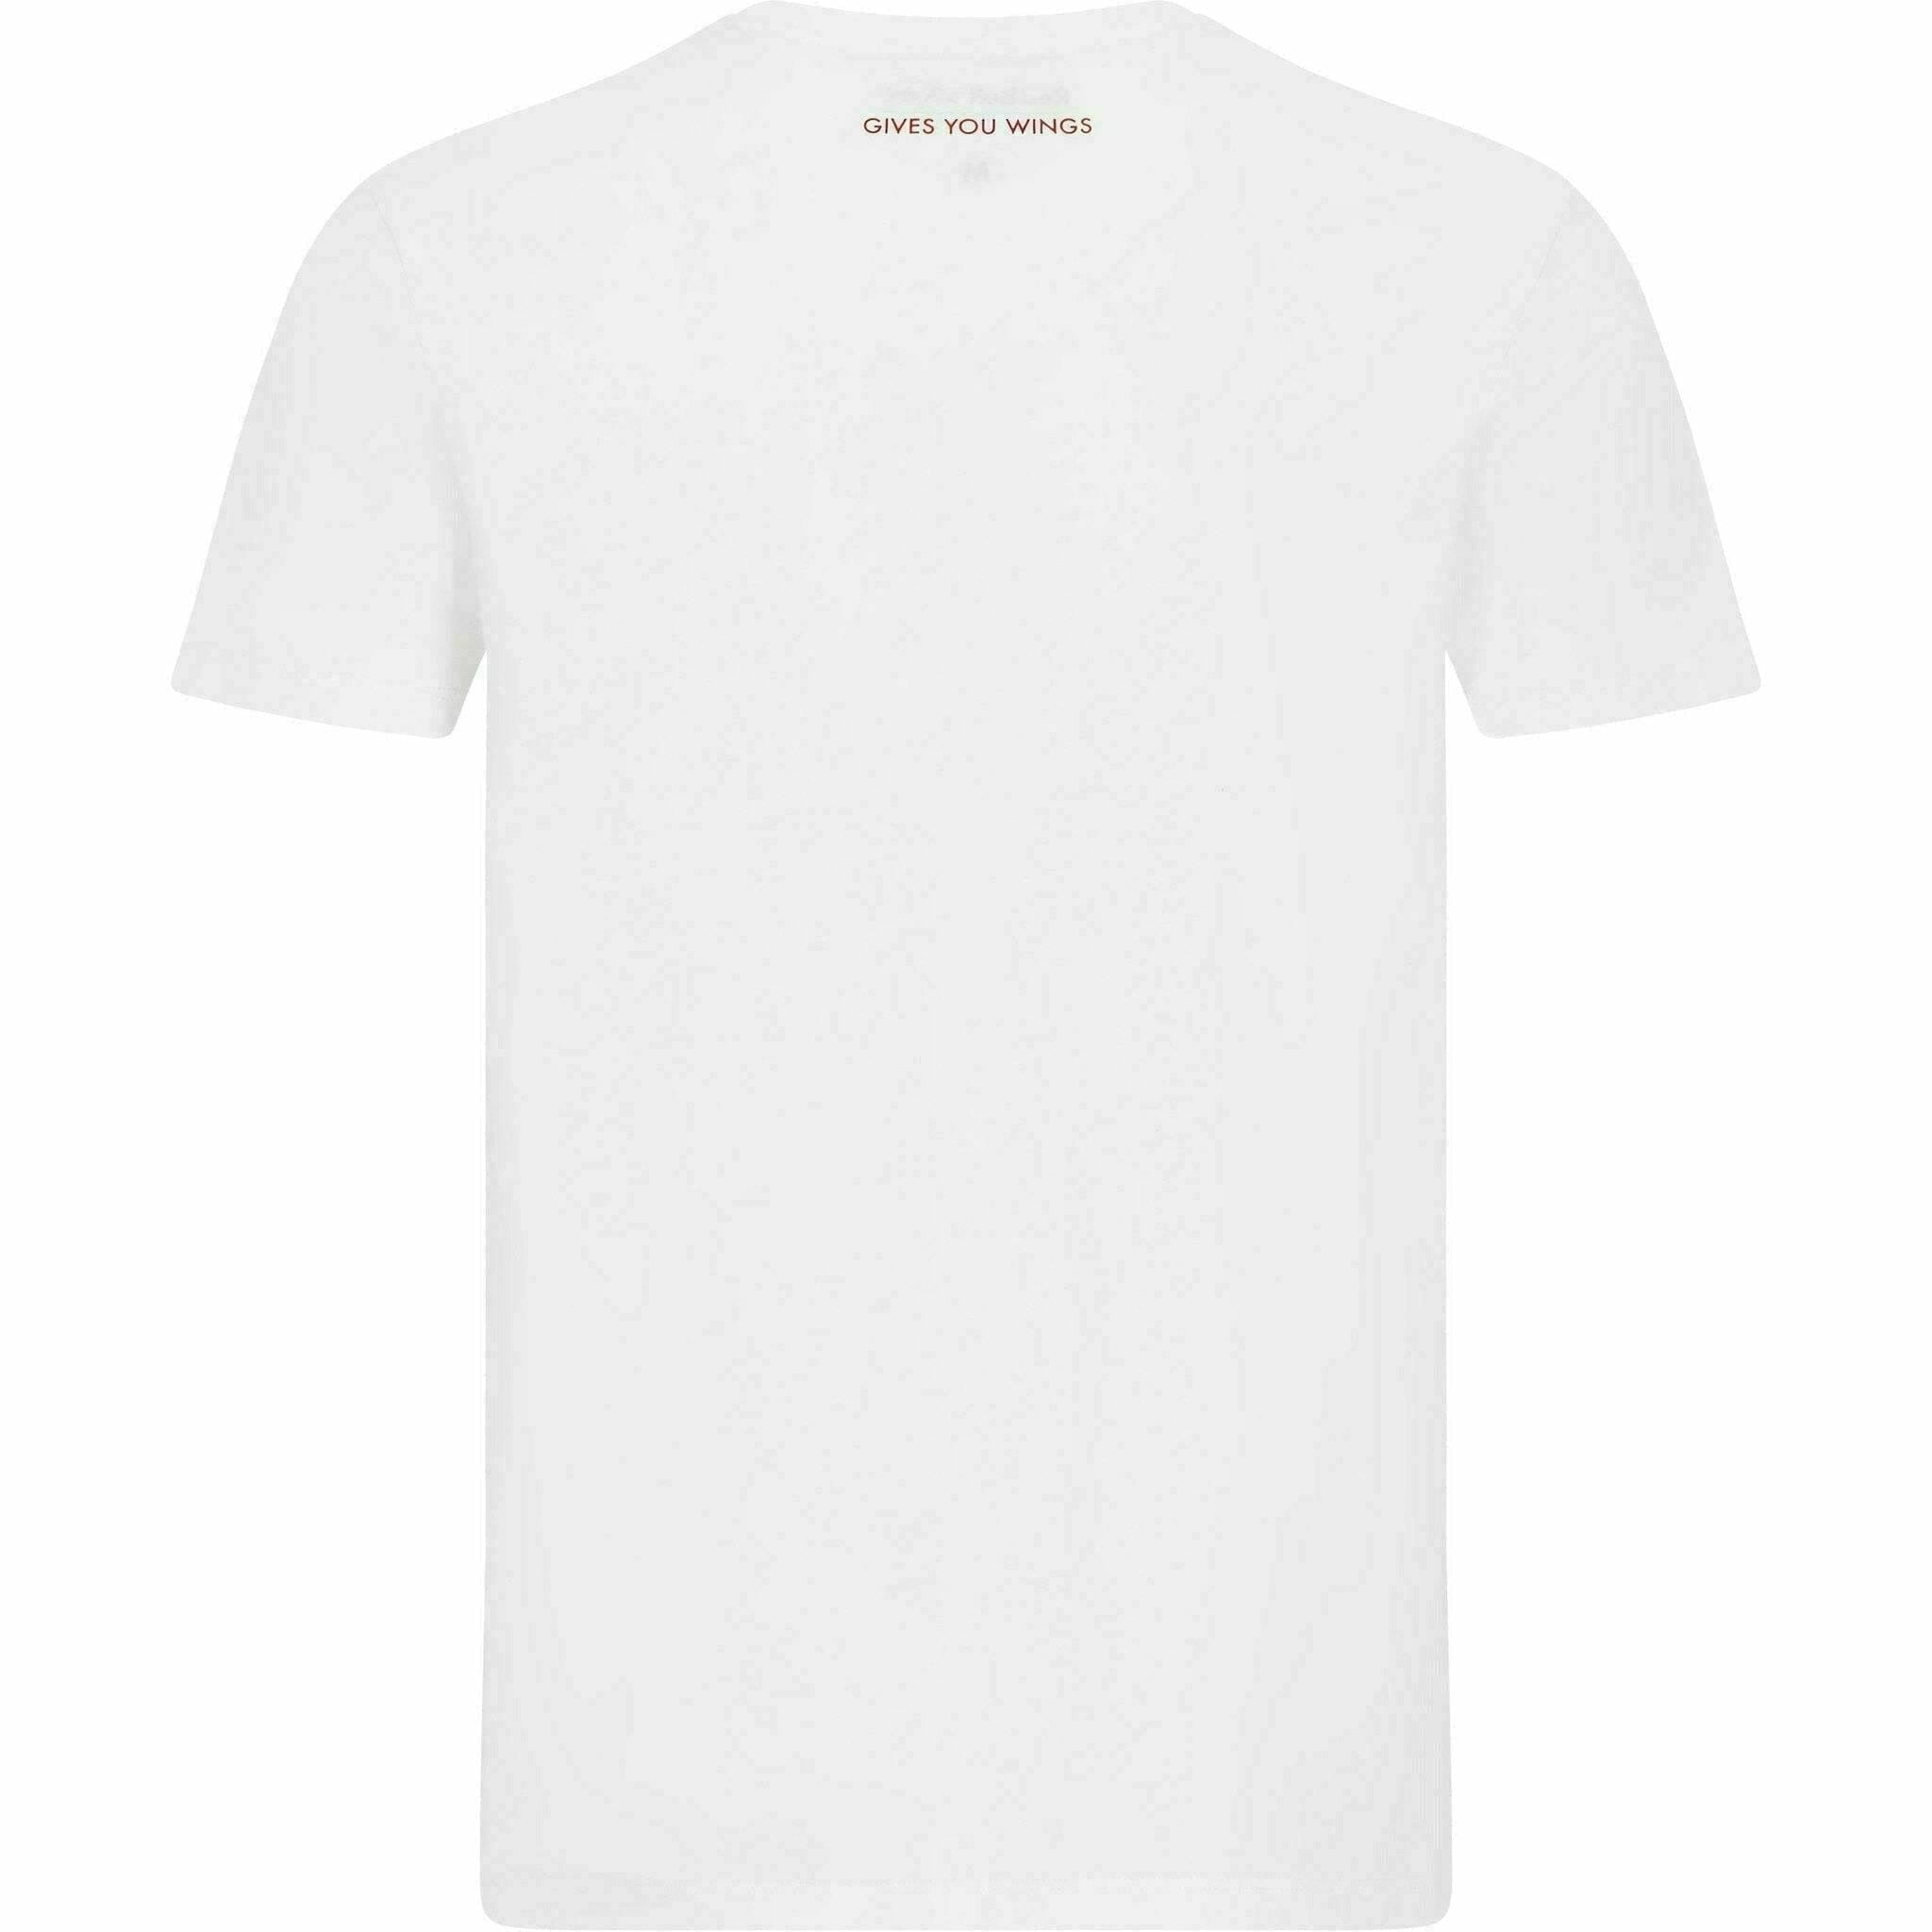 Red Bull F1 Racing Adult Fit Tee in White